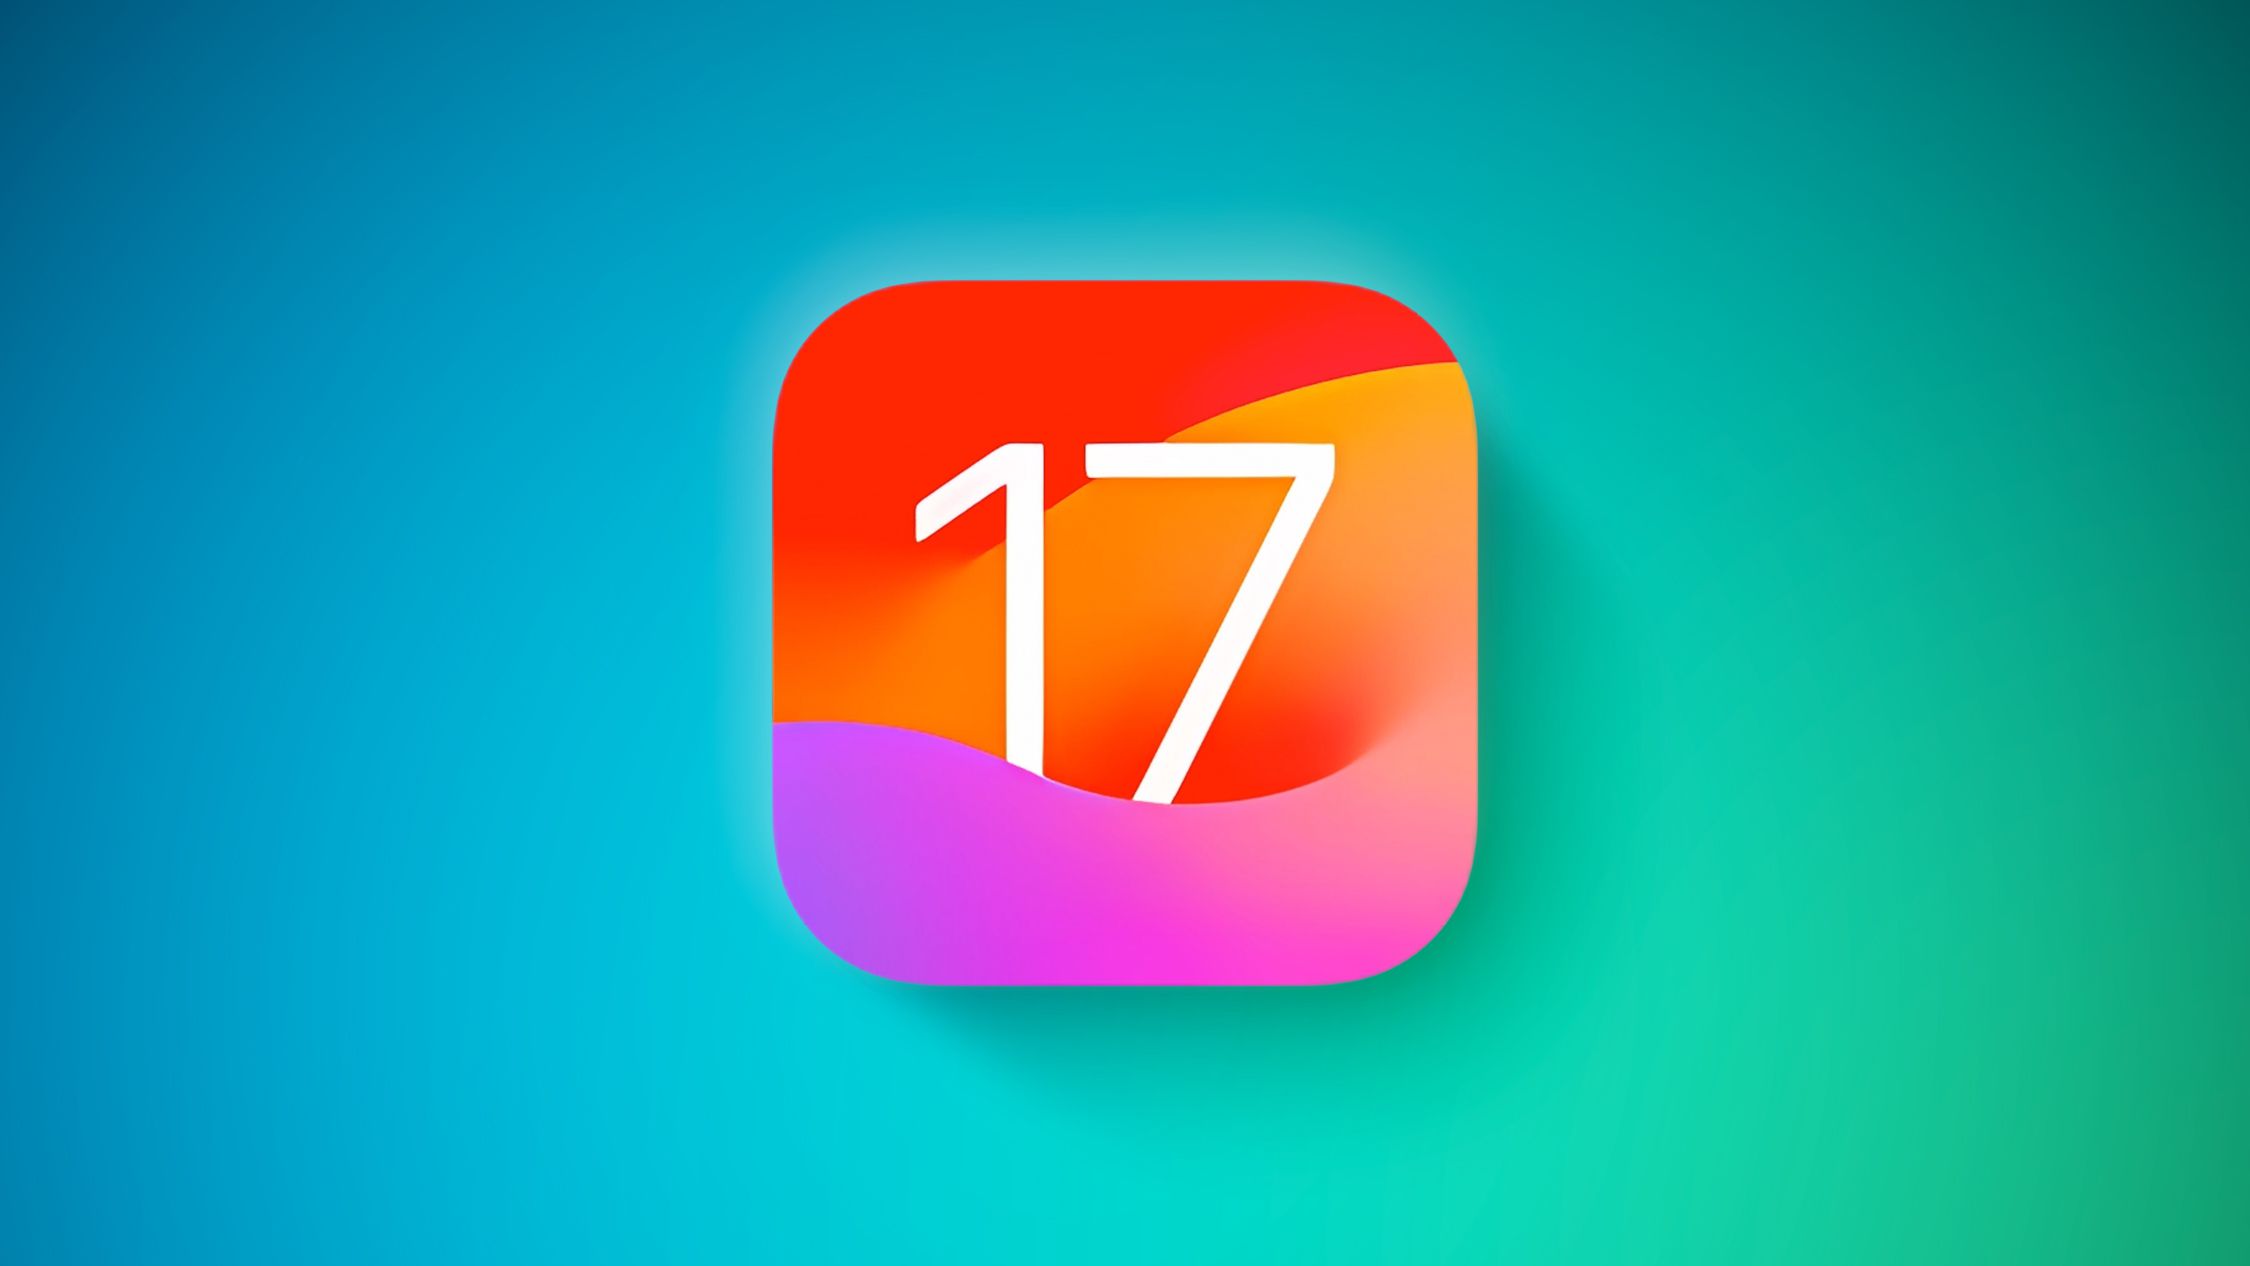 Apple Releases Second Public Betas of iOS 17 and iPadOS 17, Revised Developer Beta